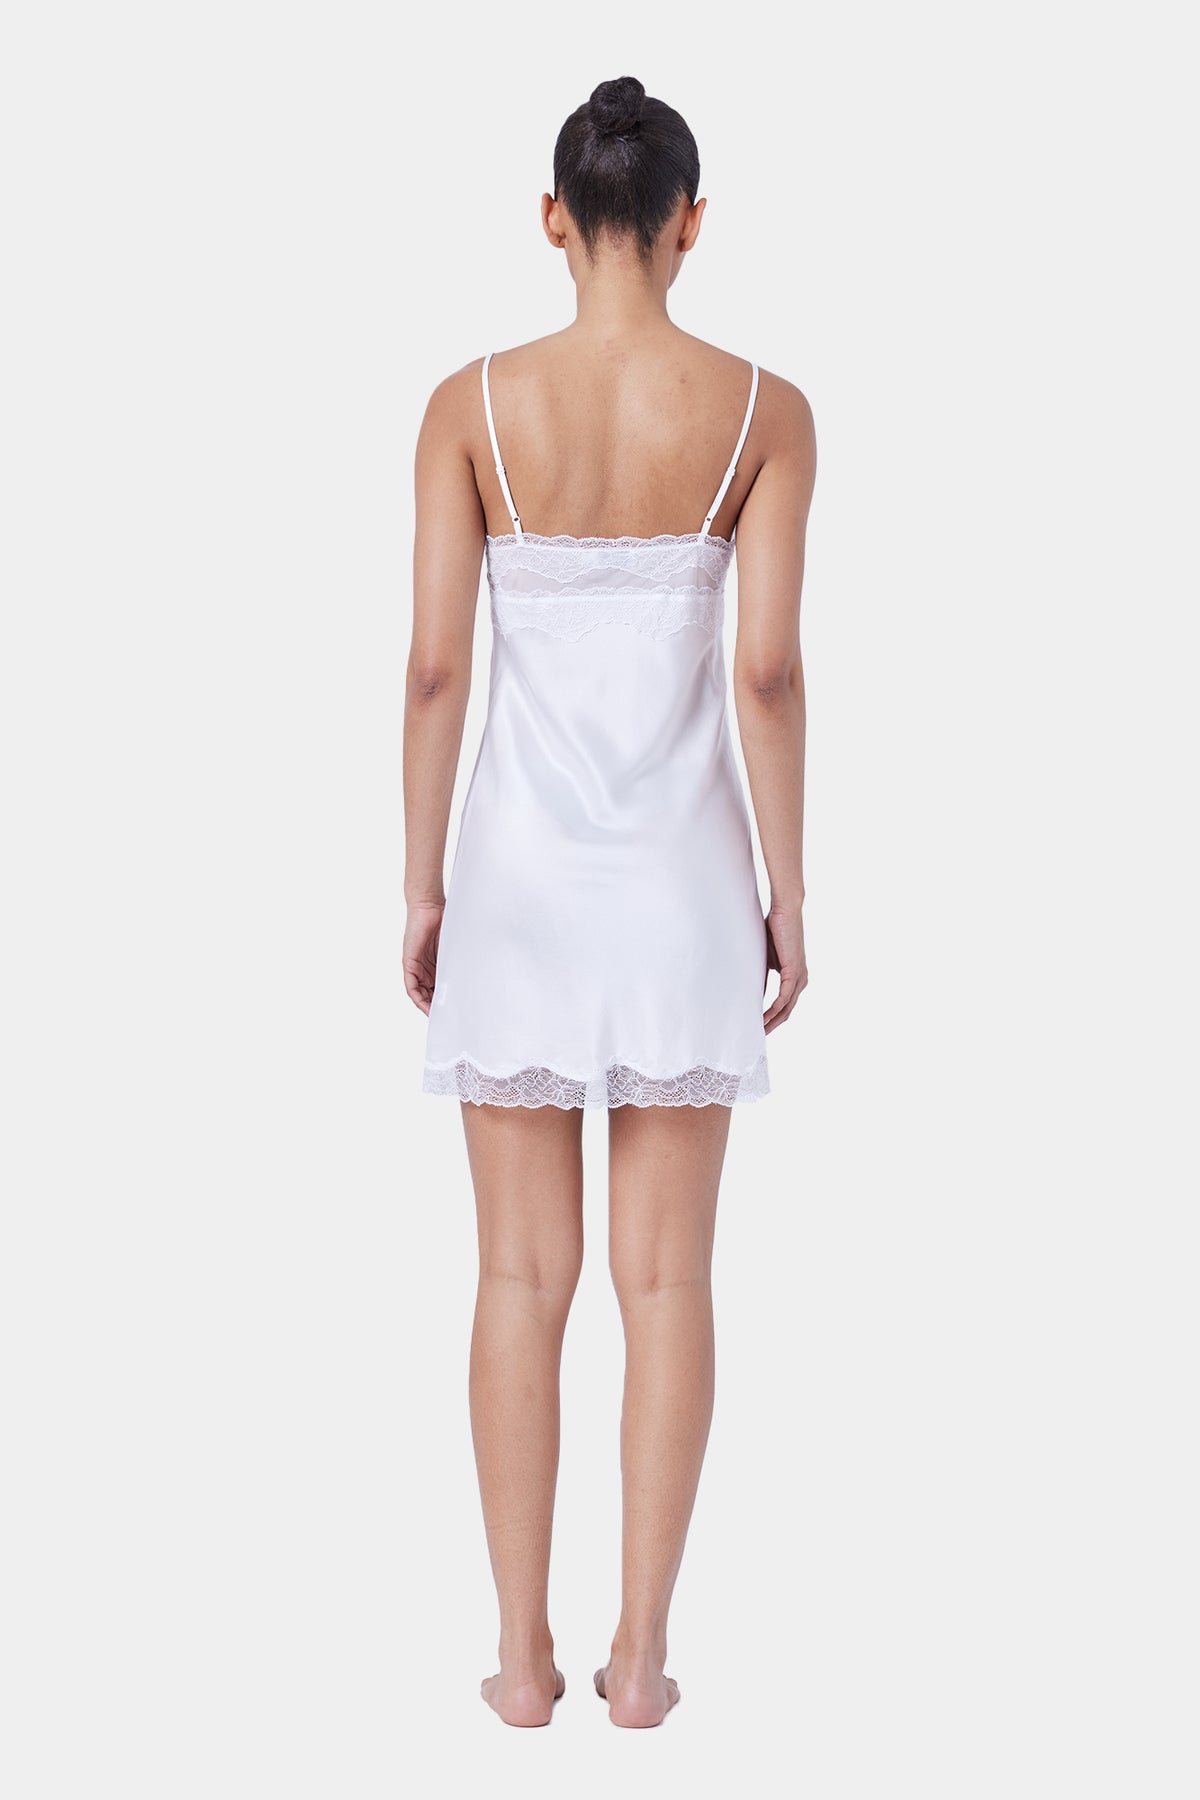 The Skylar Lace Chemise By GINIA In White